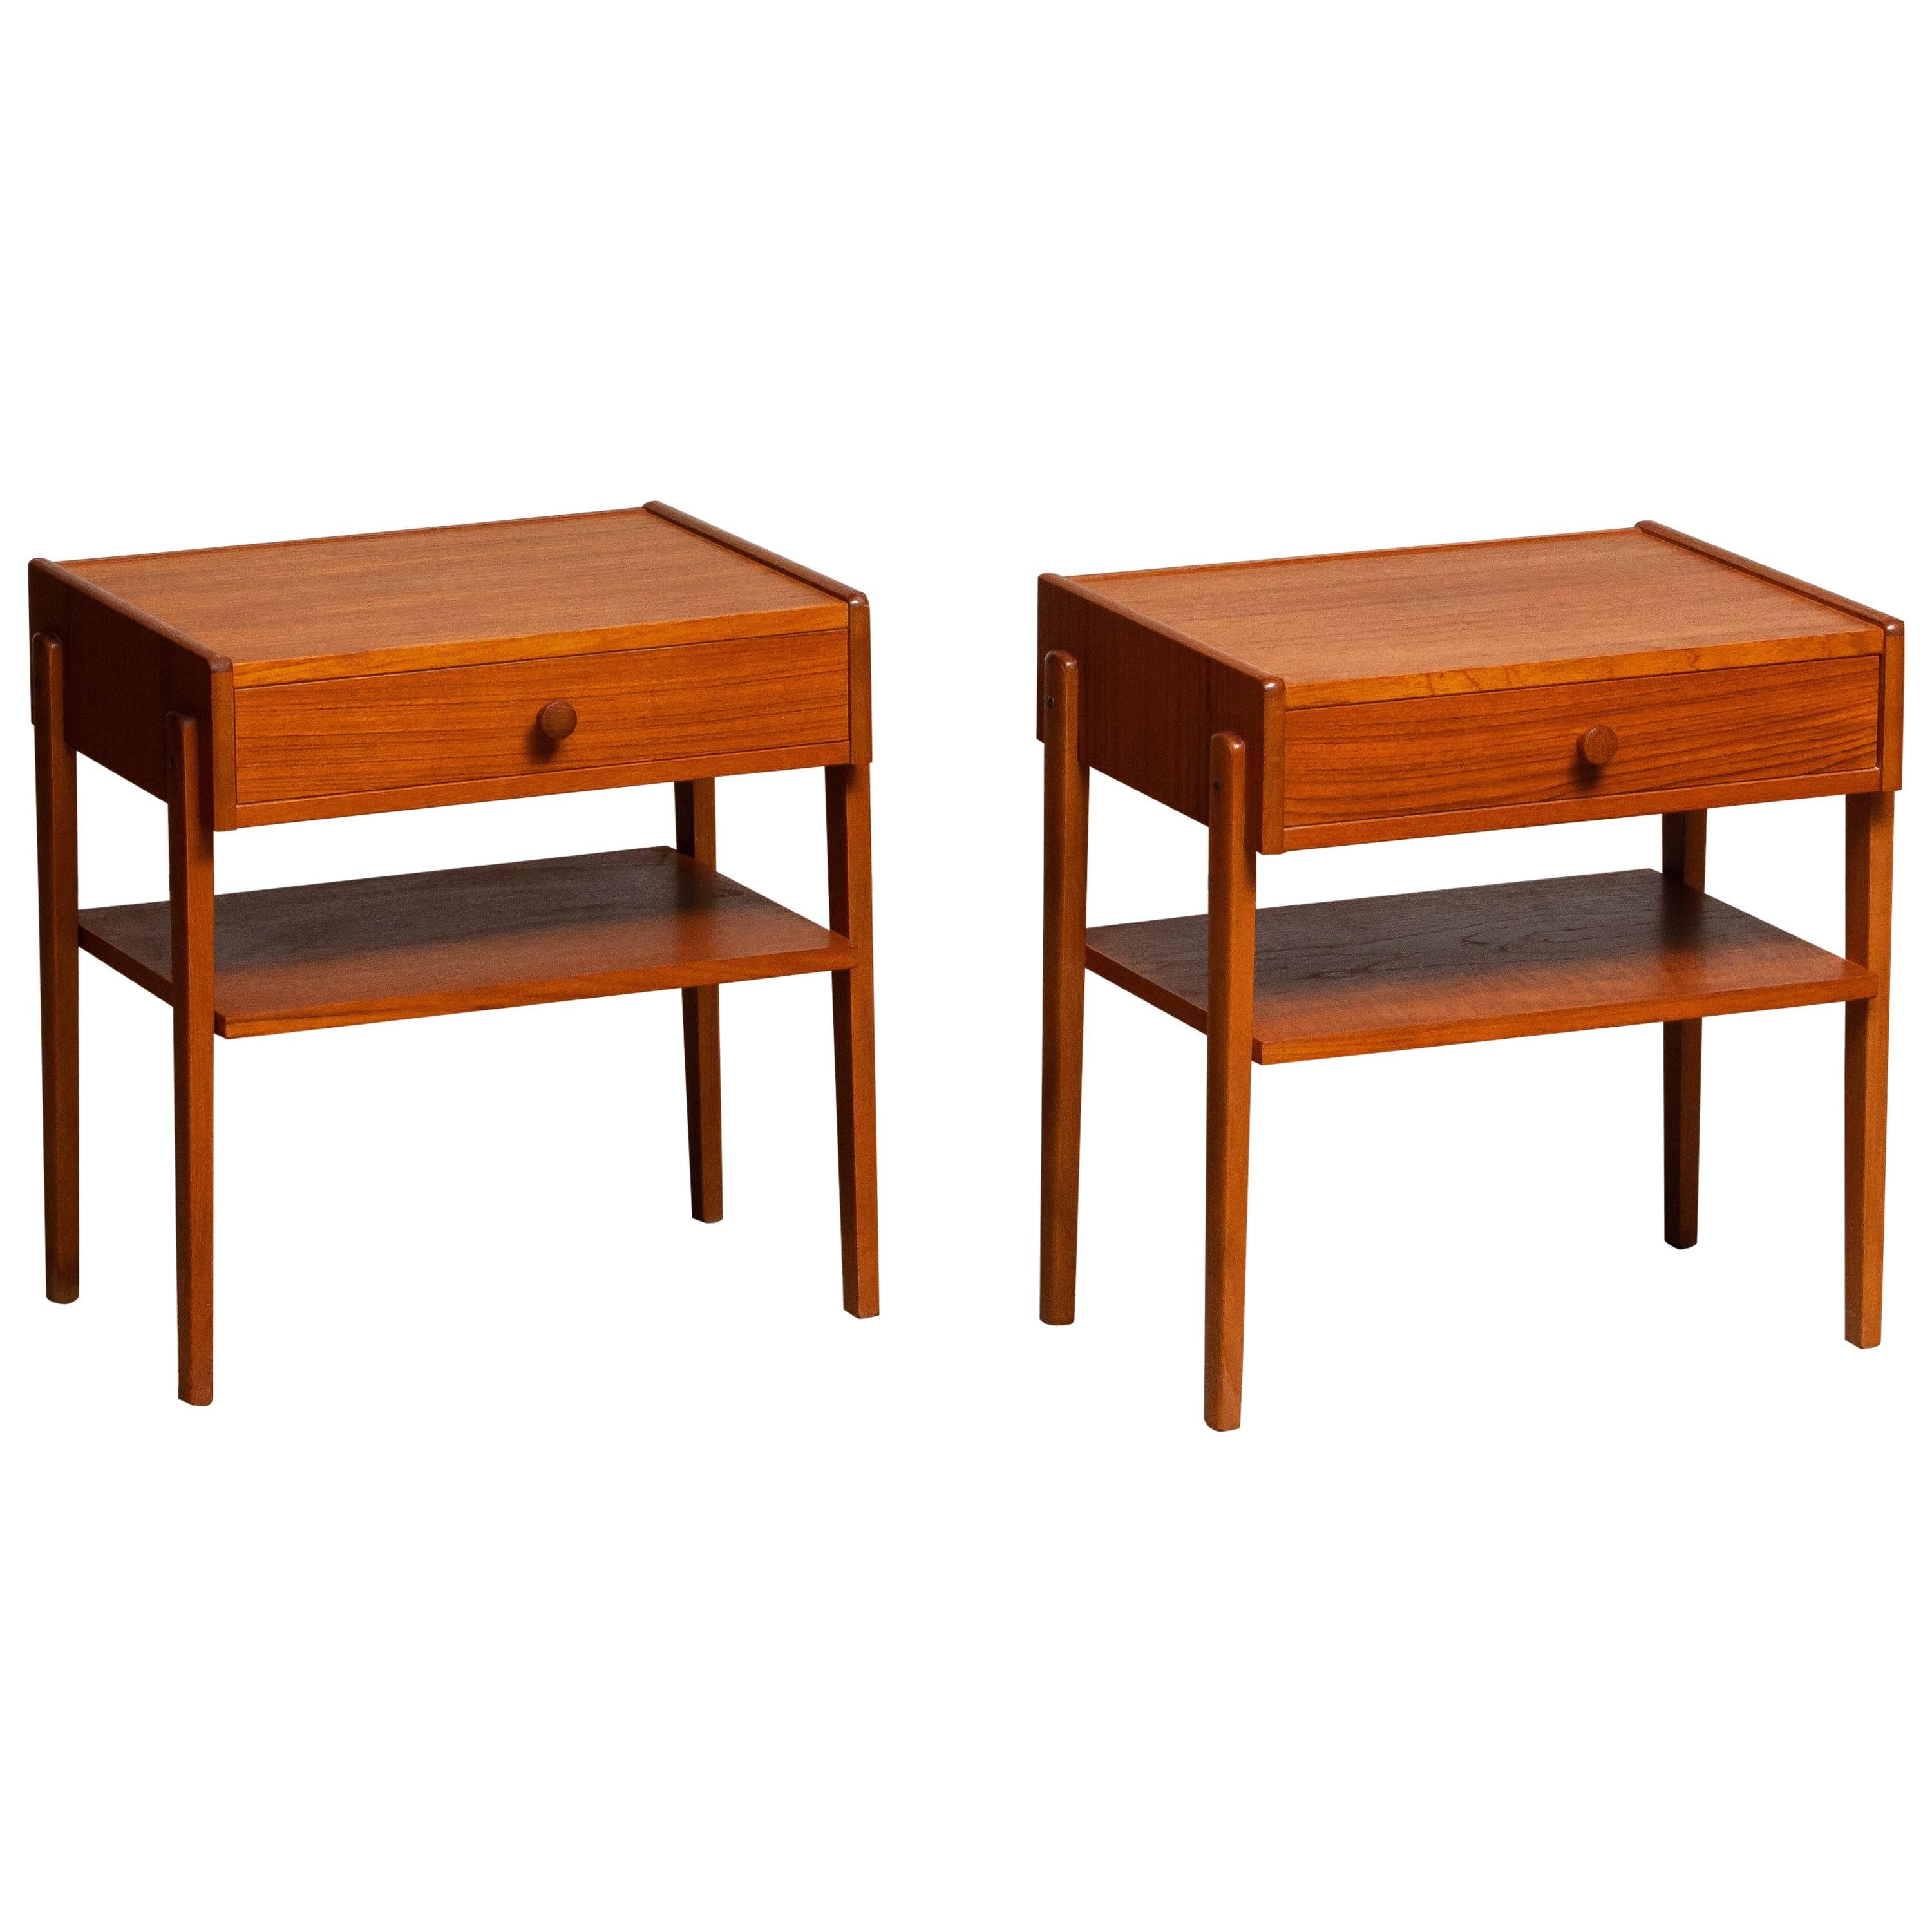 Beautiful set of two nightstands or bedside tables with drawer in teak from the 1950s and made by Carlström & Co Mobelfabrik in Sweden.